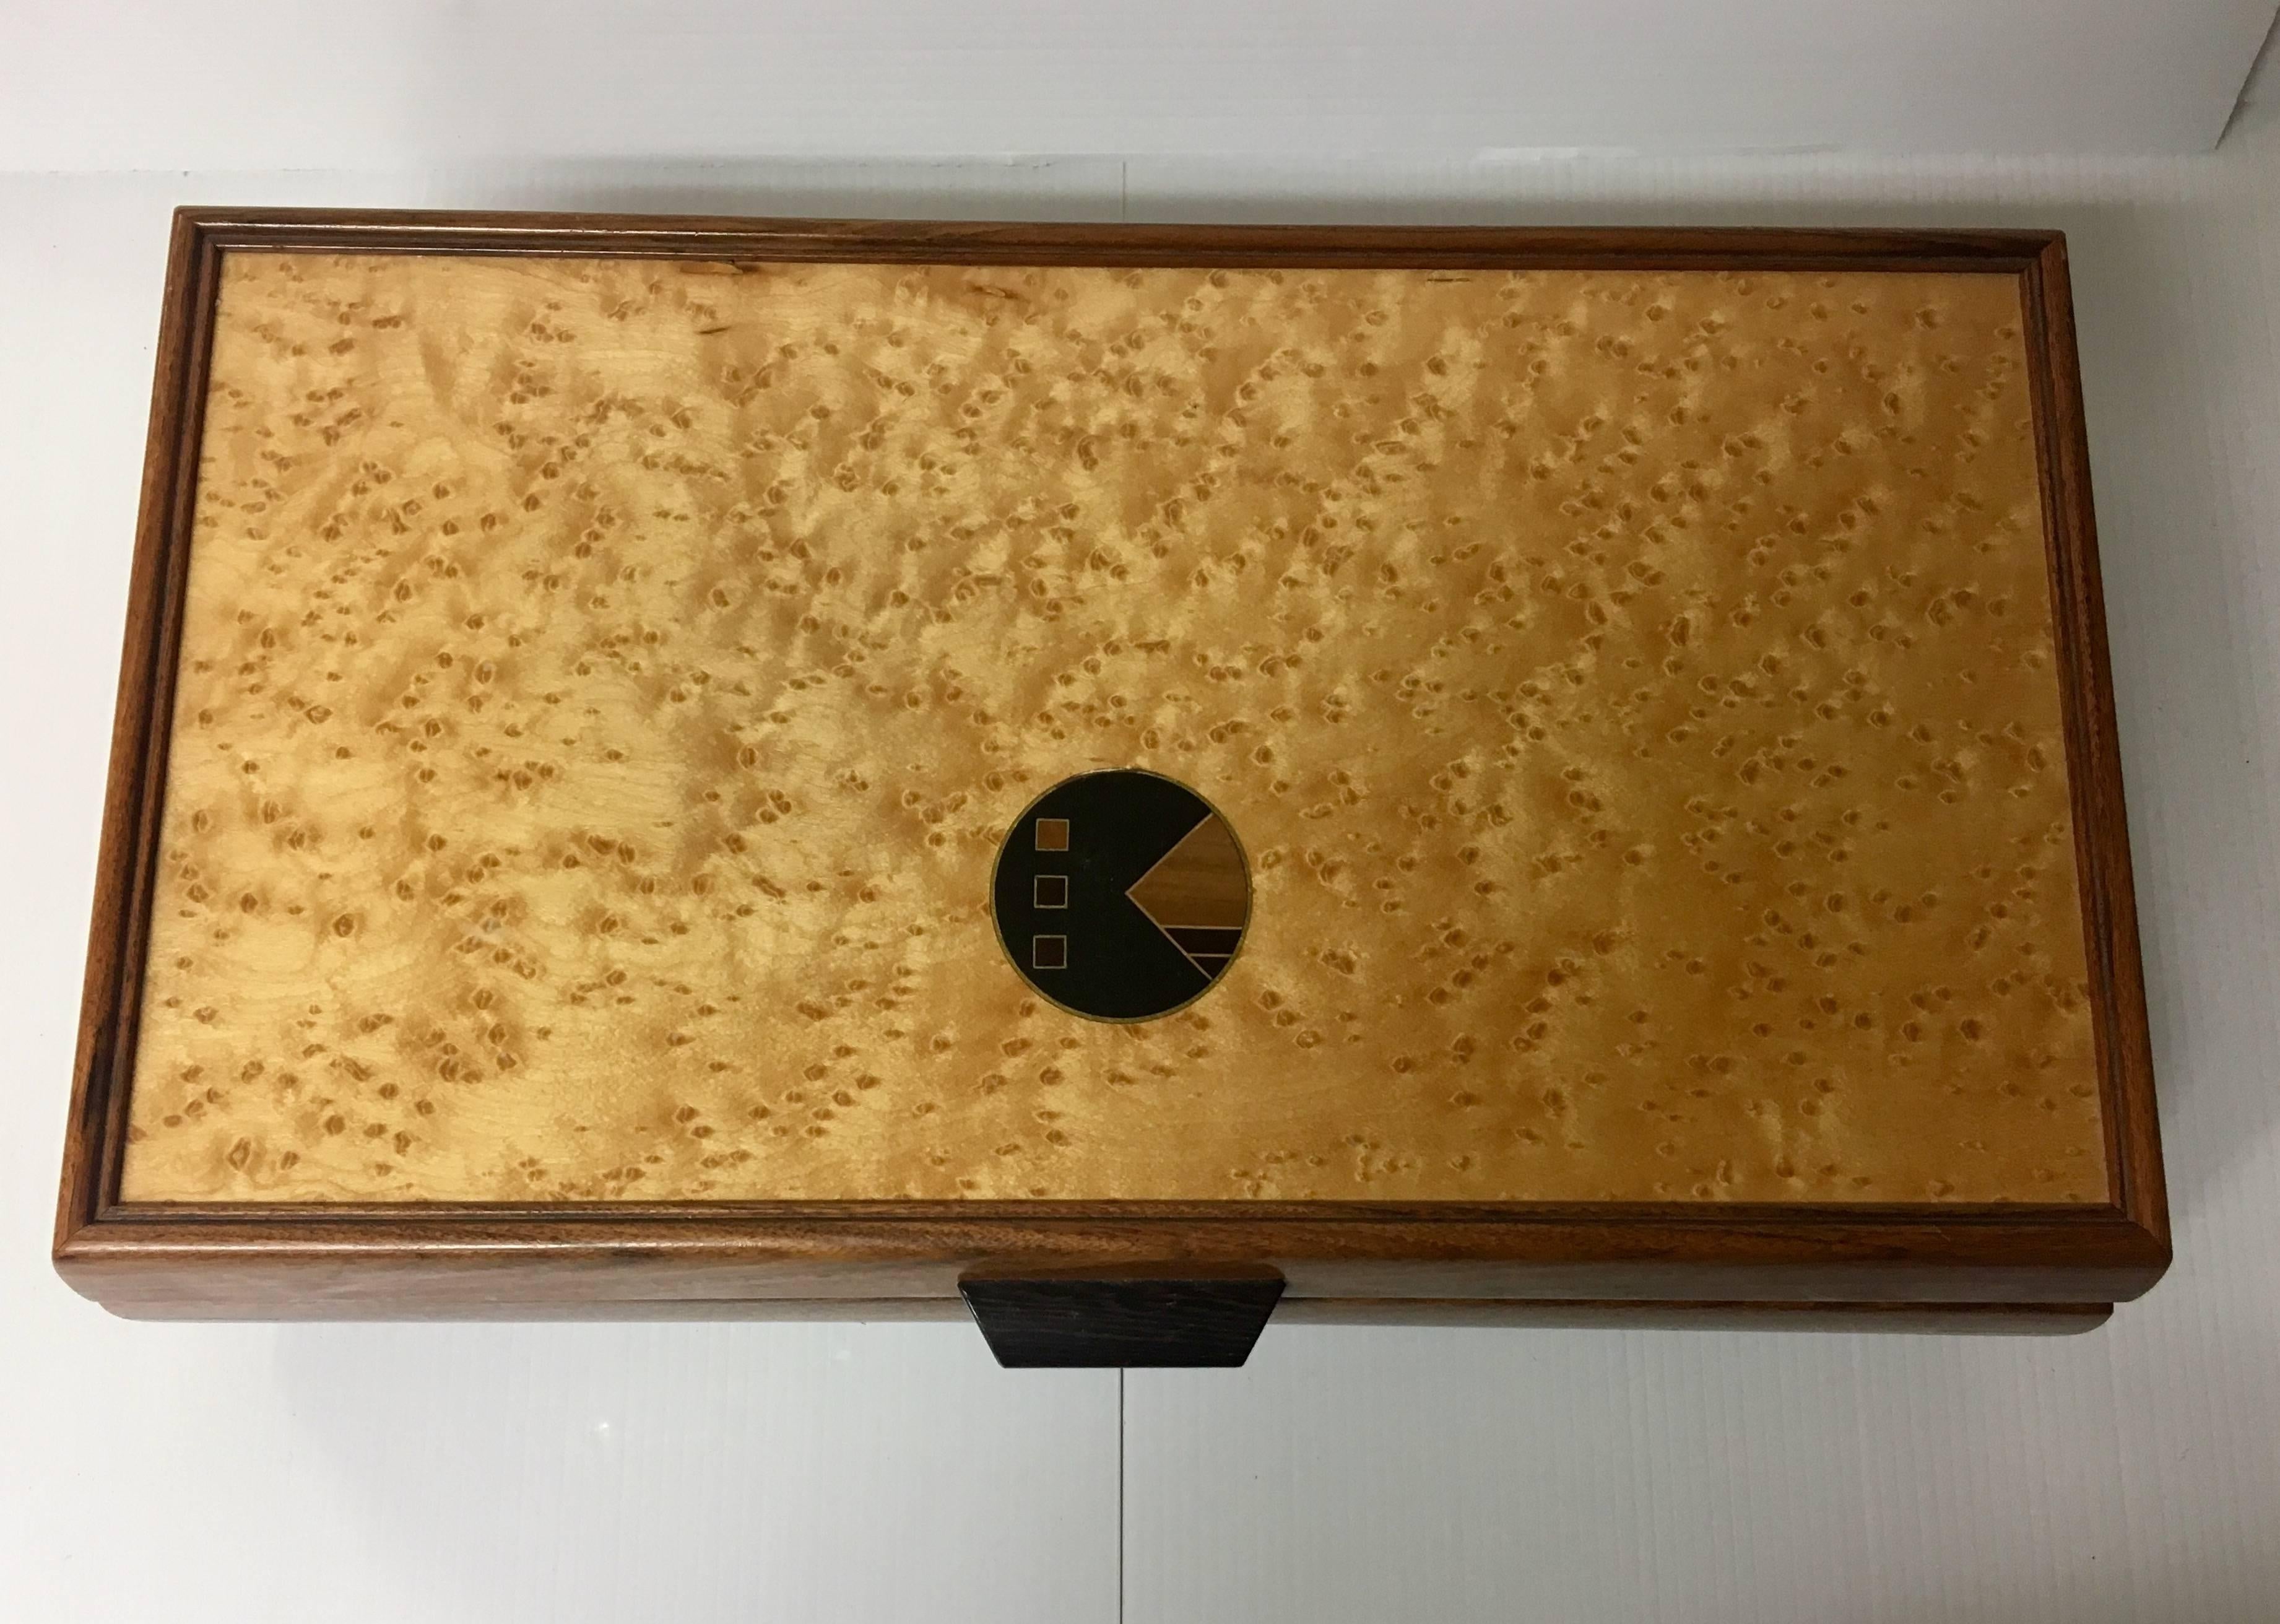 Beautiful and unique handcrafted jewelry box made of inlaid mixed woods (mahogany, walnut, burl wood, rosewood) and brass. The piece is handmade and has lots of storage and compartments.